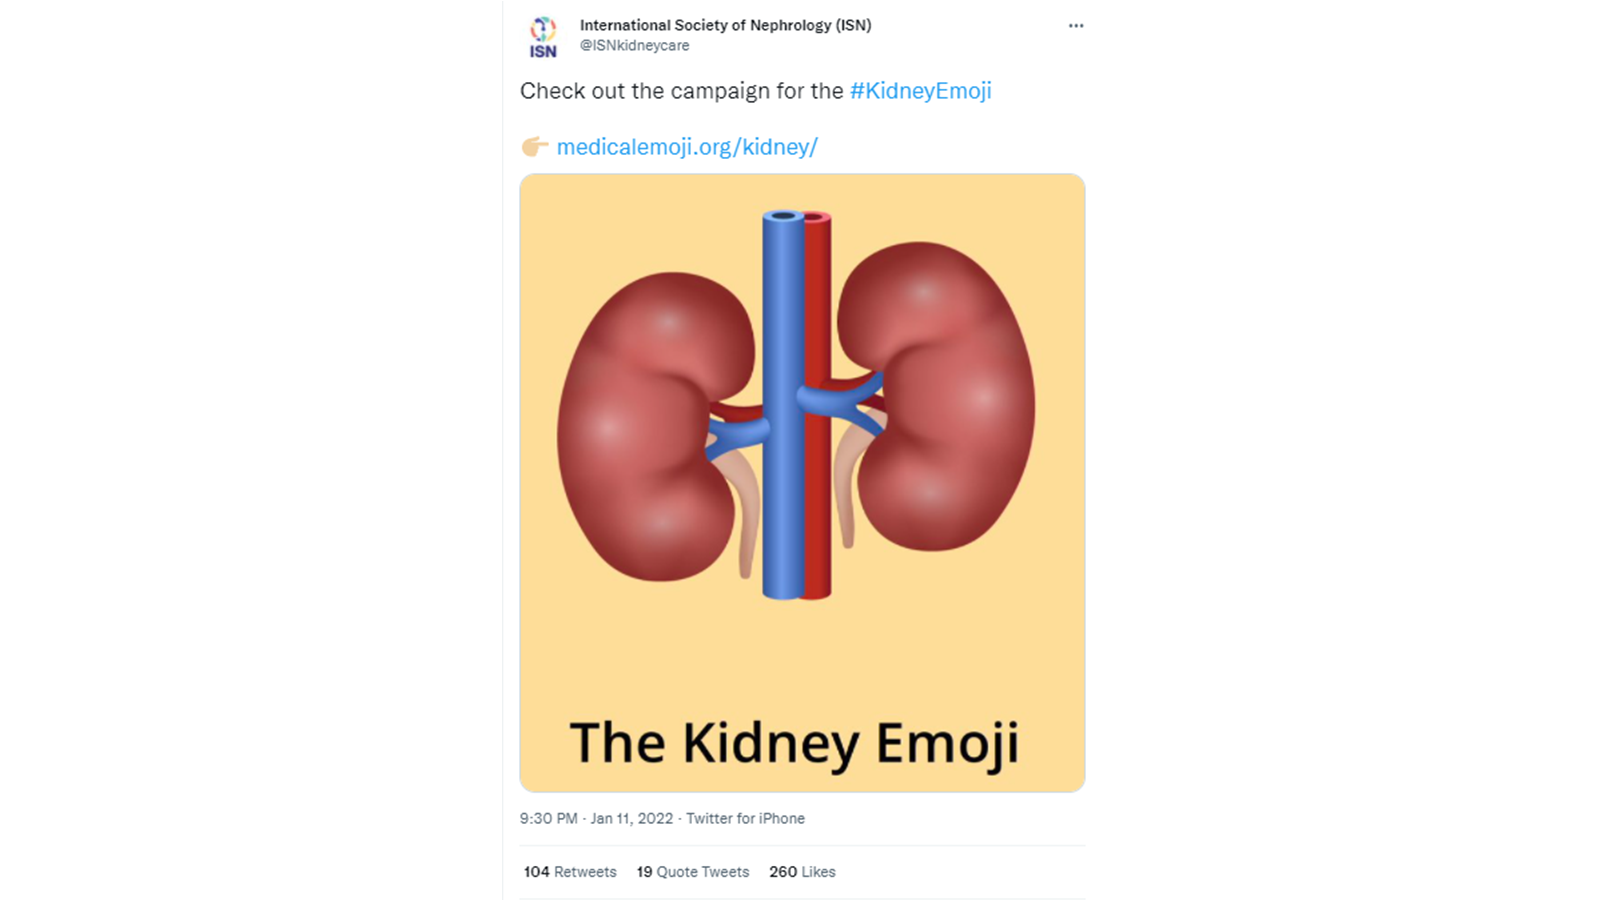 A tweet from the International Society of Nephrology showing support for a kidney emoji